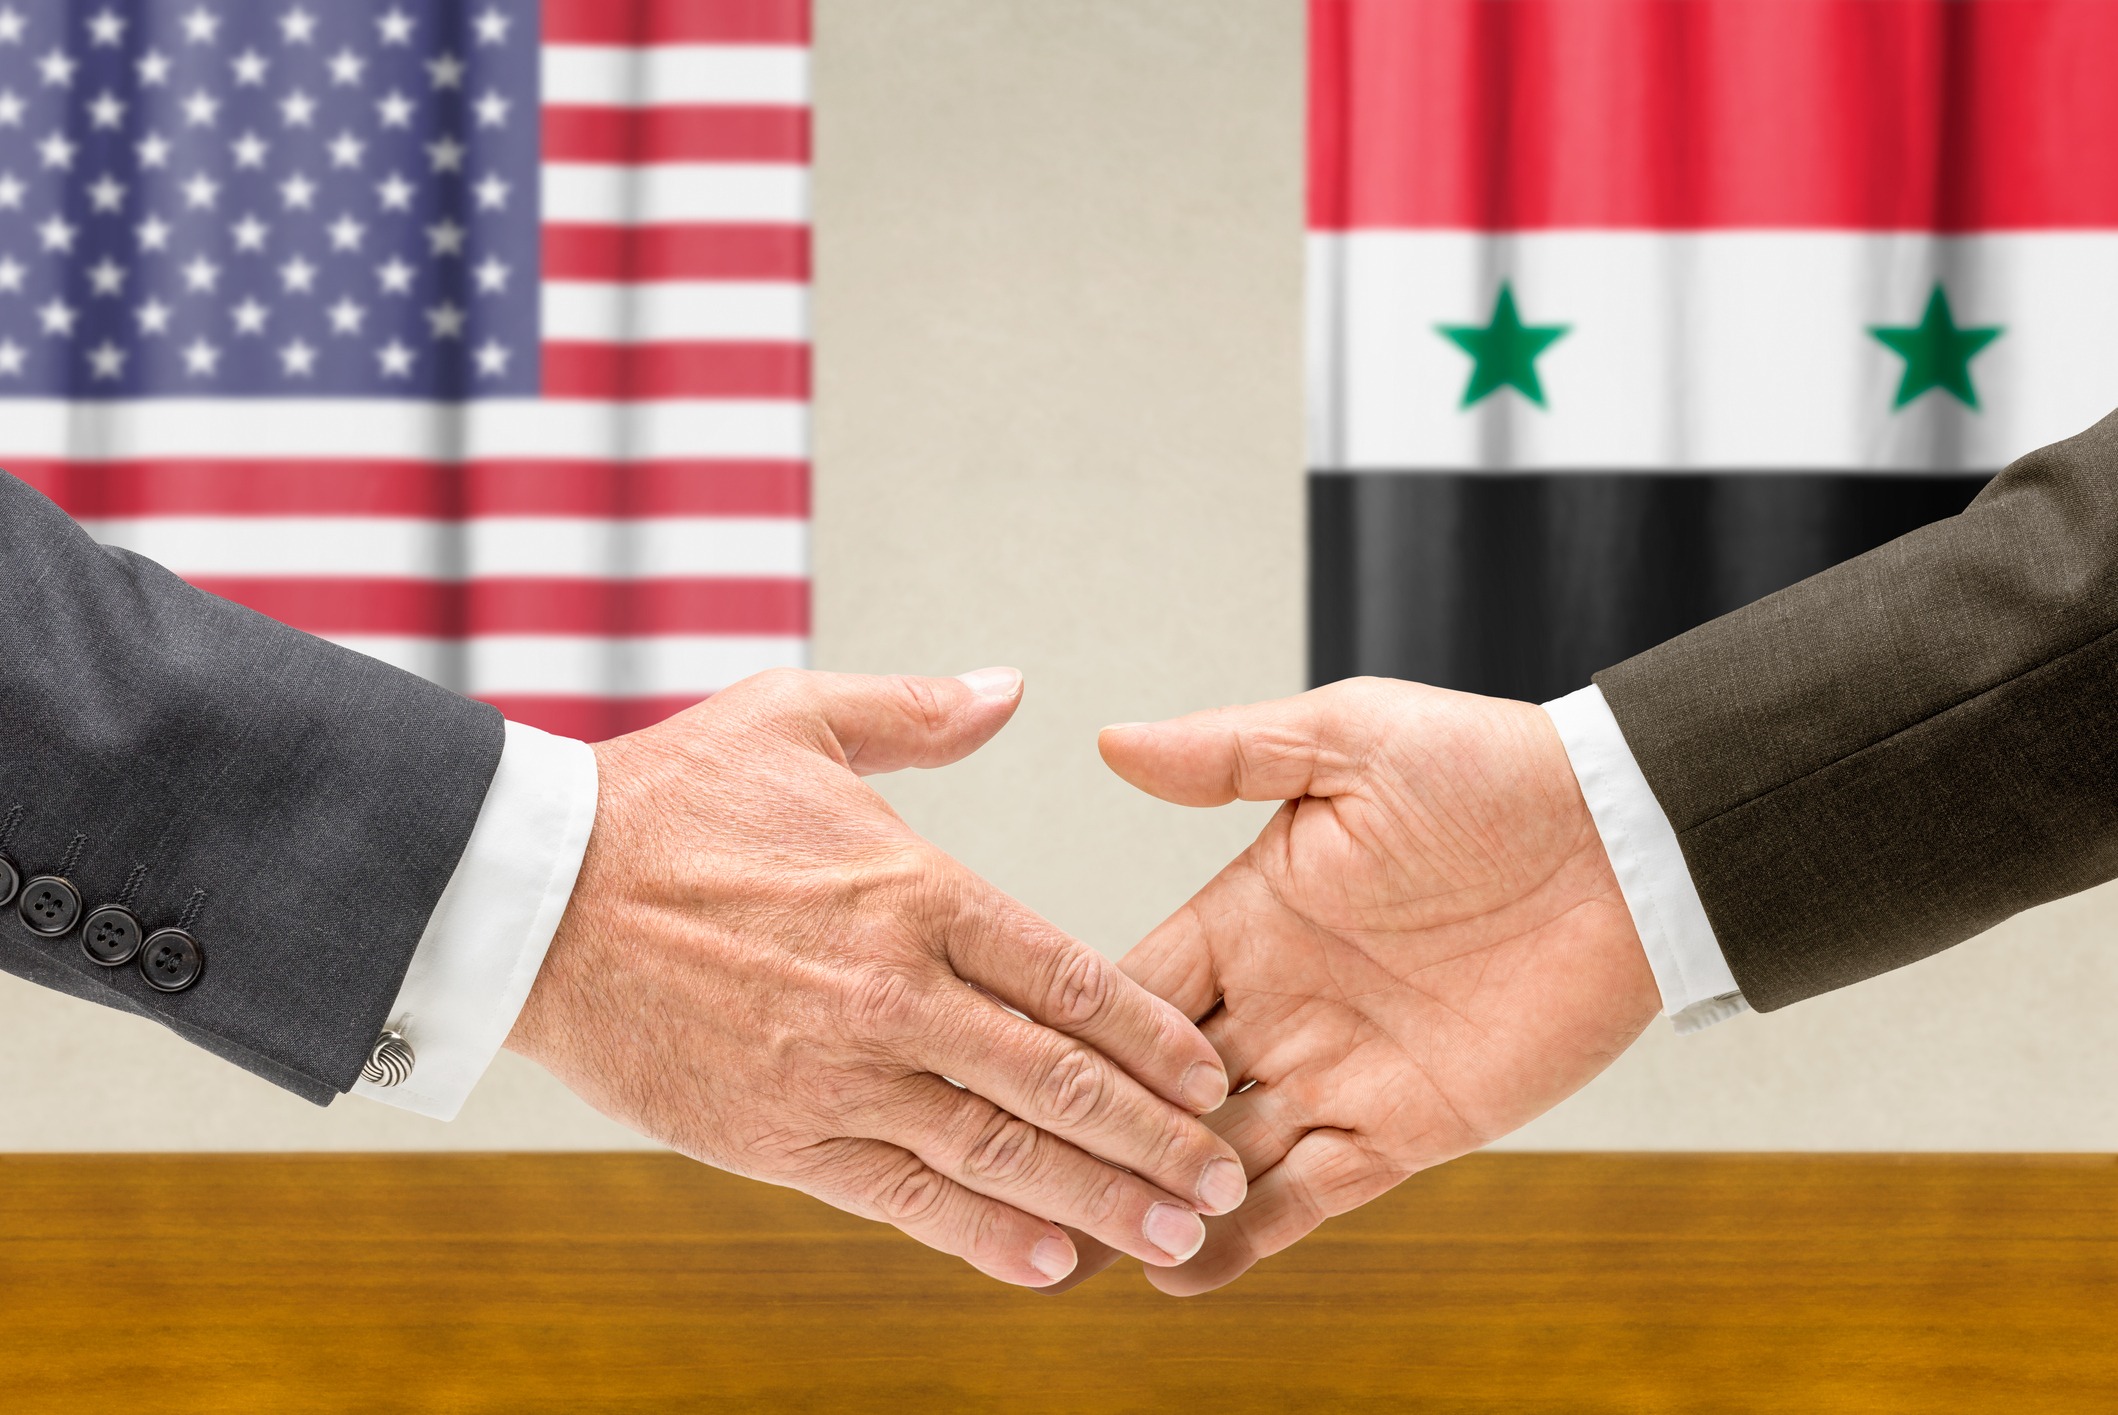 The Syrian Crisis and US Policy